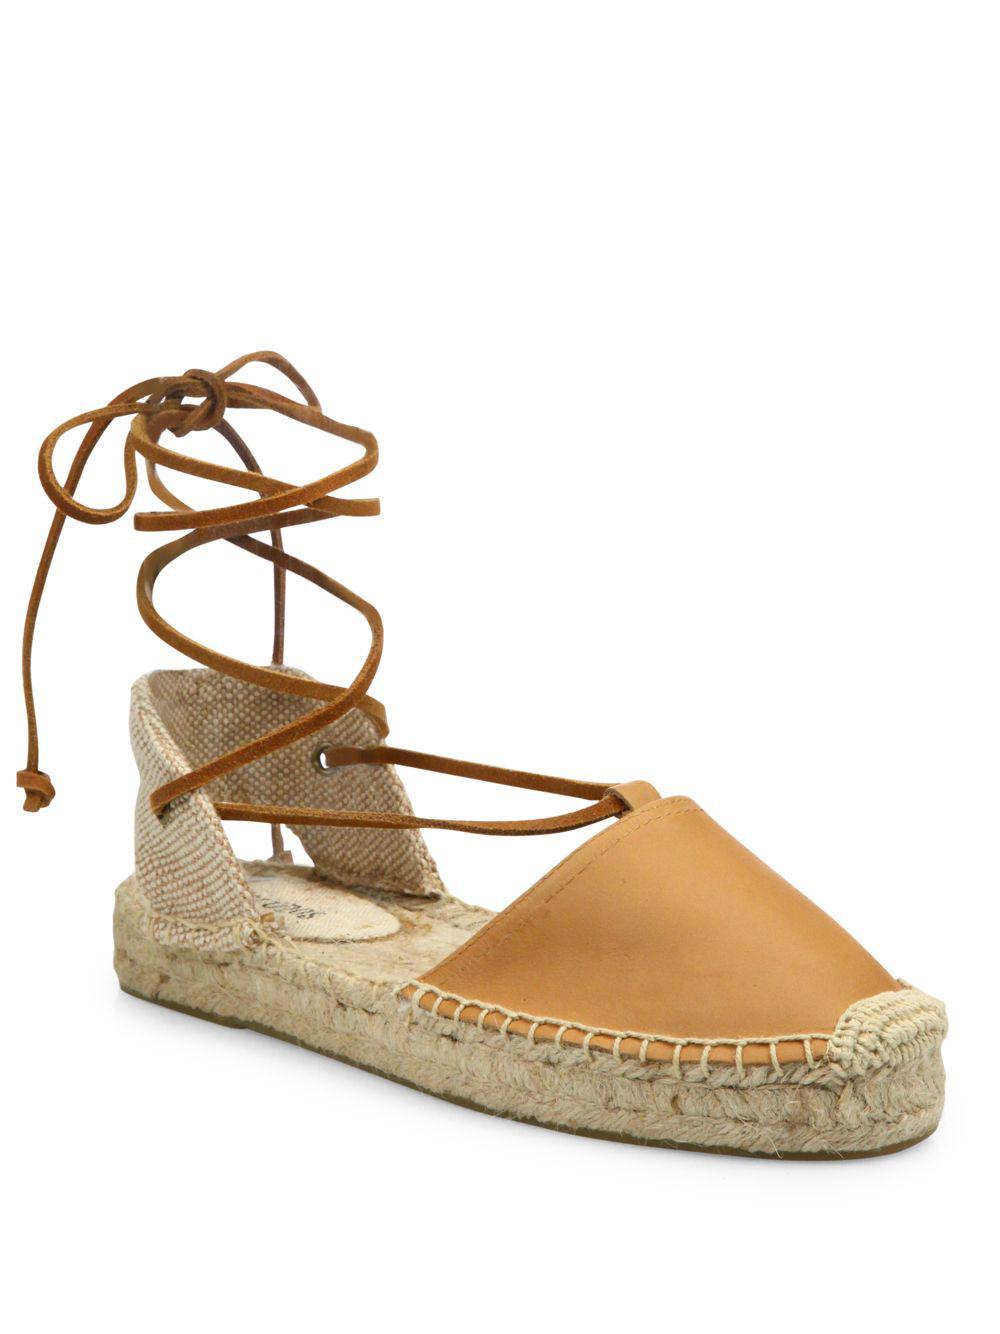 Soludos Leather Lace-up Espadrilles in Tan (Brown) - Lyst